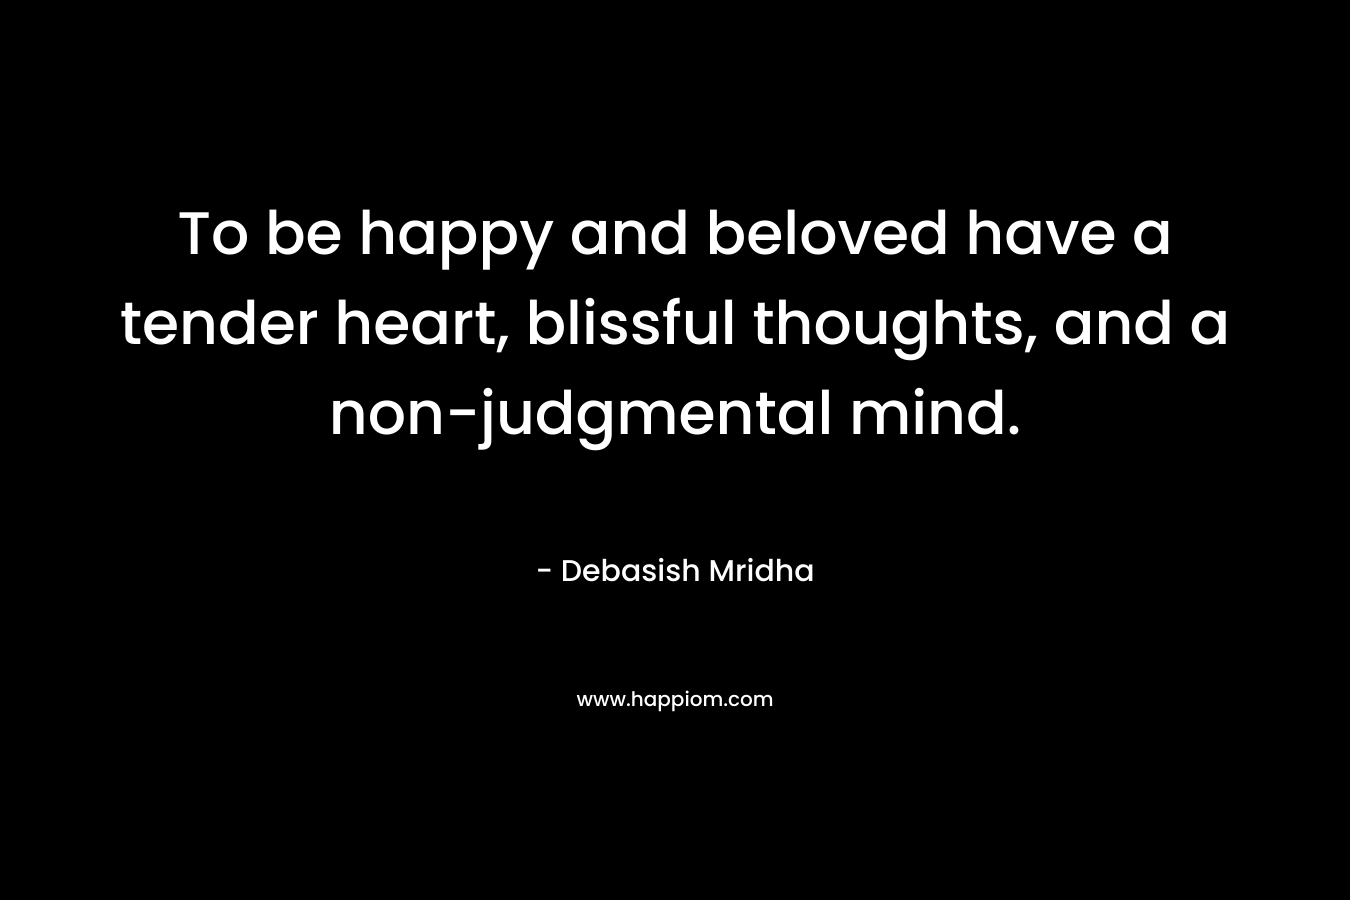 To be happy and beloved have a tender heart, blissful thoughts, and a non-judgmental mind.